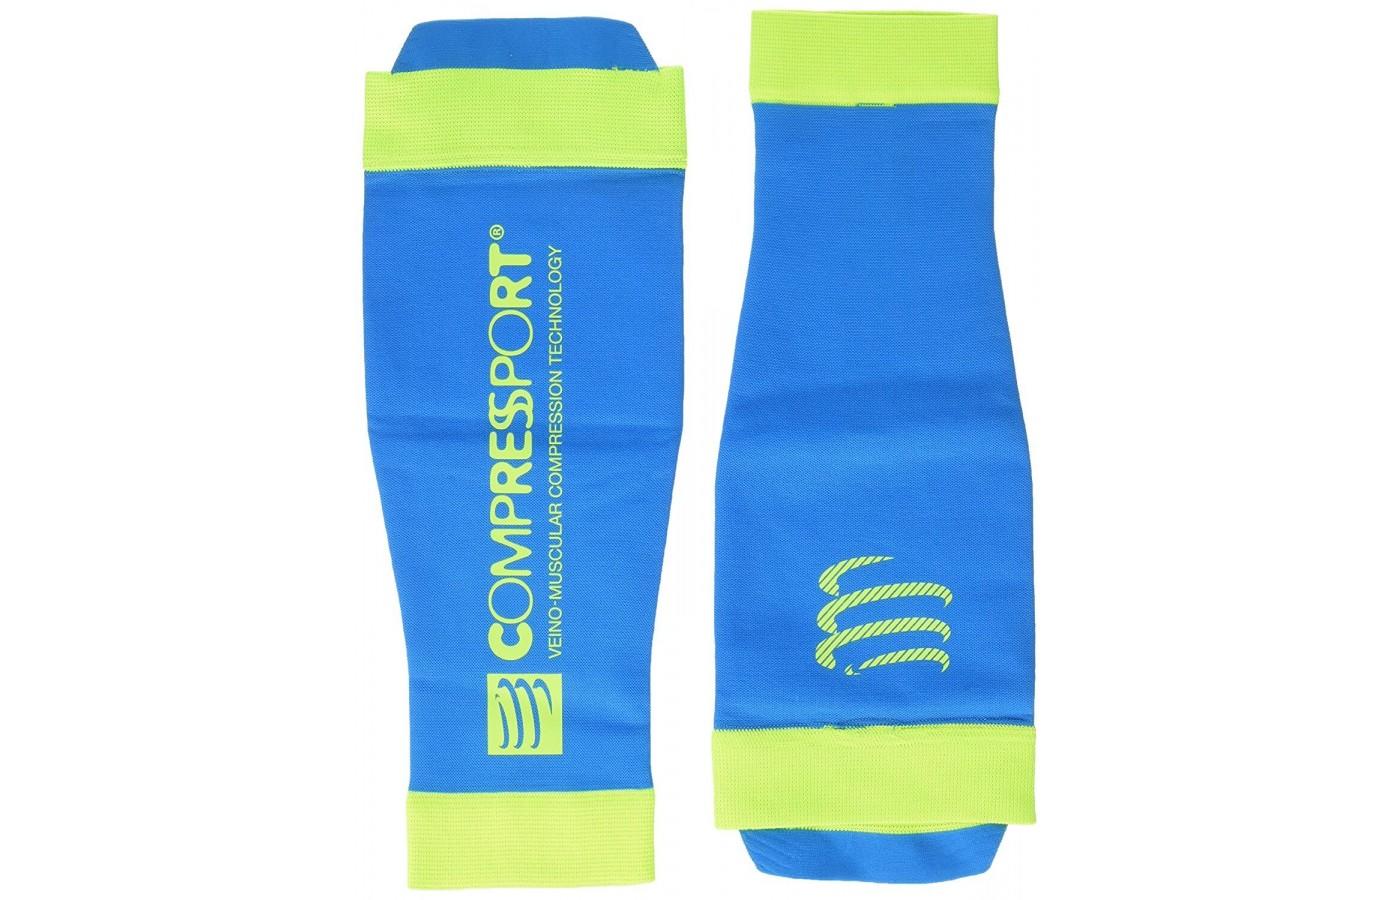 The Compresssport Calf Sleeves are made with tear-proof material